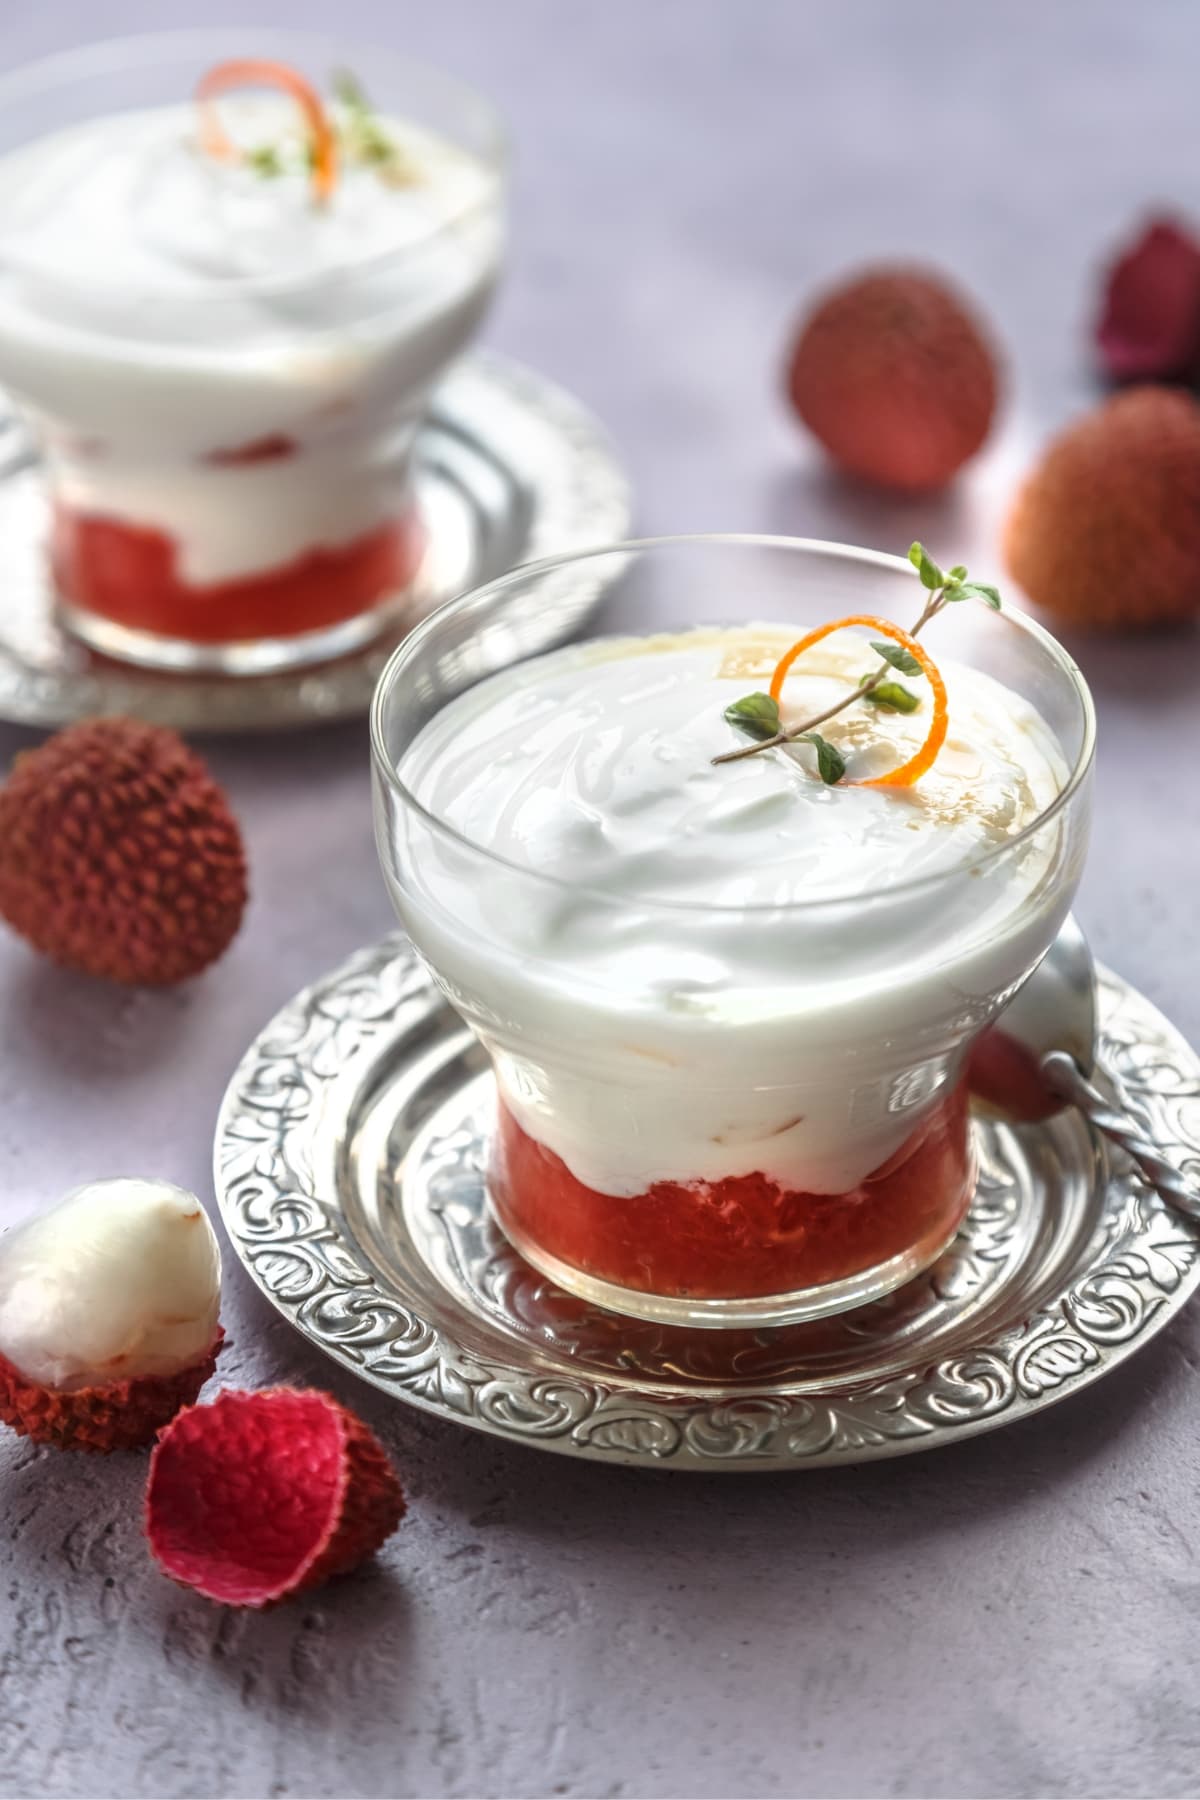 Lychee Dessert in a Small Container with Grapefruit